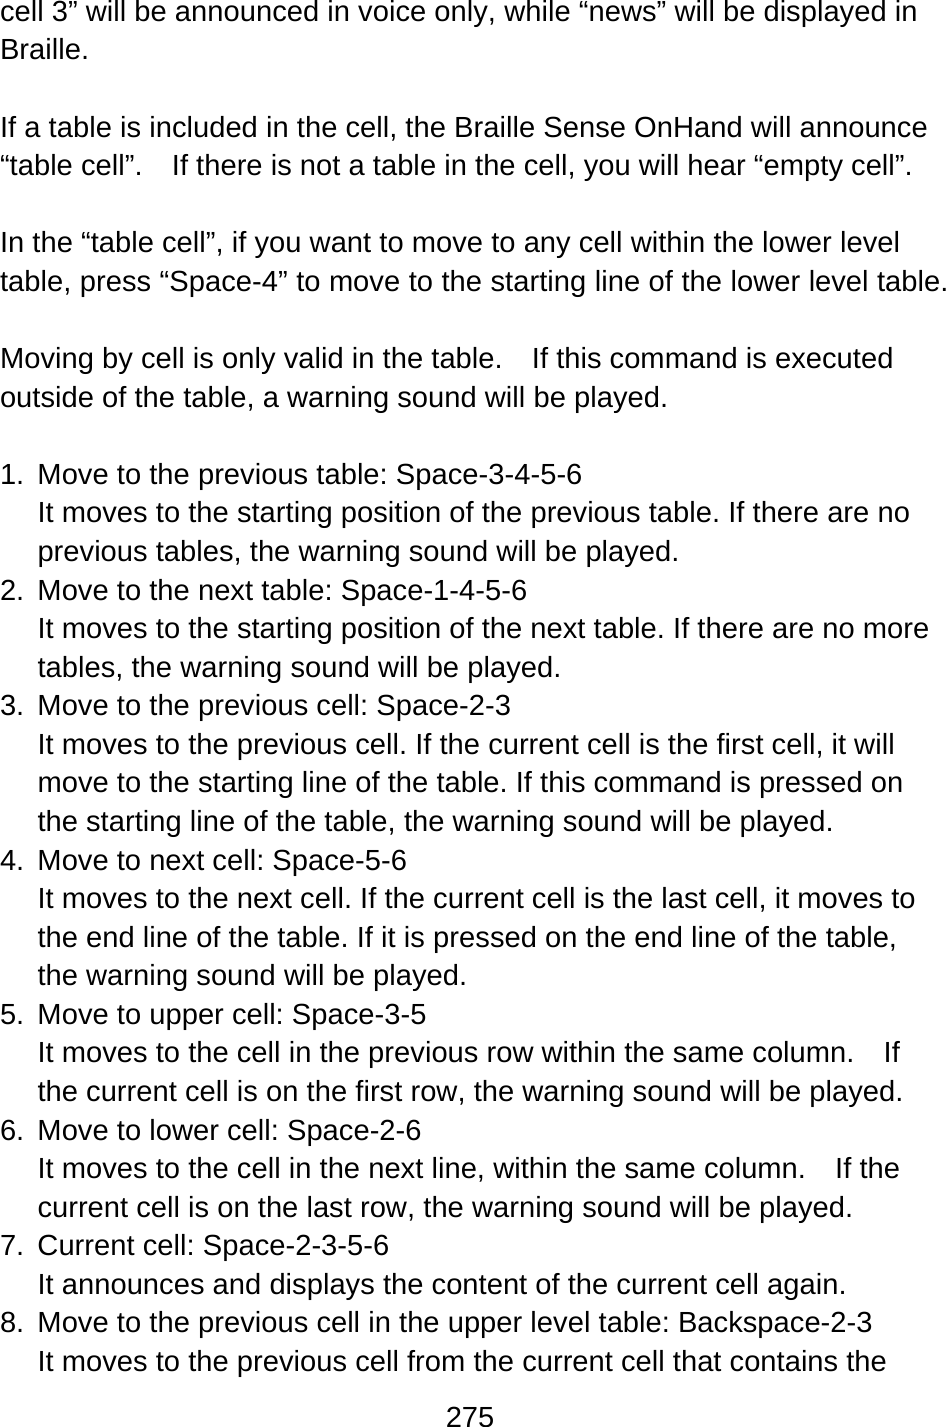 275  cell 3” will be announced in voice only, while “news” will be displayed in Braille.  If a table is included in the cell, the Braille Sense OnHand will announce “table cell”.    If there is not a table in the cell, you will hear “empty cell”.  In the “table cell”, if you want to move to any cell within the lower level table, press “Space-4” to move to the starting line of the lower level table.      Moving by cell is only valid in the table.    If this command is executed outside of the table, a warning sound will be played.  1.  Move to the previous table: Space-3-4-5-6 It moves to the starting position of the previous table. If there are no previous tables, the warning sound will be played. 2.  Move to the next table: Space-1-4-5-6 It moves to the starting position of the next table. If there are no more tables, the warning sound will be played. 3.  Move to the previous cell: Space-2-3 It moves to the previous cell. If the current cell is the first cell, it will move to the starting line of the table. If this command is pressed on the starting line of the table, the warning sound will be played. 4.  Move to next cell: Space-5-6 It moves to the next cell. If the current cell is the last cell, it moves to the end line of the table. If it is pressed on the end line of the table, the warning sound will be played. 5.  Move to upper cell: Space-3-5 It moves to the cell in the previous row within the same column.    If the current cell is on the first row, the warning sound will be played. 6.  Move to lower cell: Space-2-6 It moves to the cell in the next line, within the same column.    If the current cell is on the last row, the warning sound will be played. 7.  Current cell: Space-2-3-5-6 It announces and displays the content of the current cell again. 8.  Move to the previous cell in the upper level table: Backspace-2-3 It moves to the previous cell from the current cell that contains the 